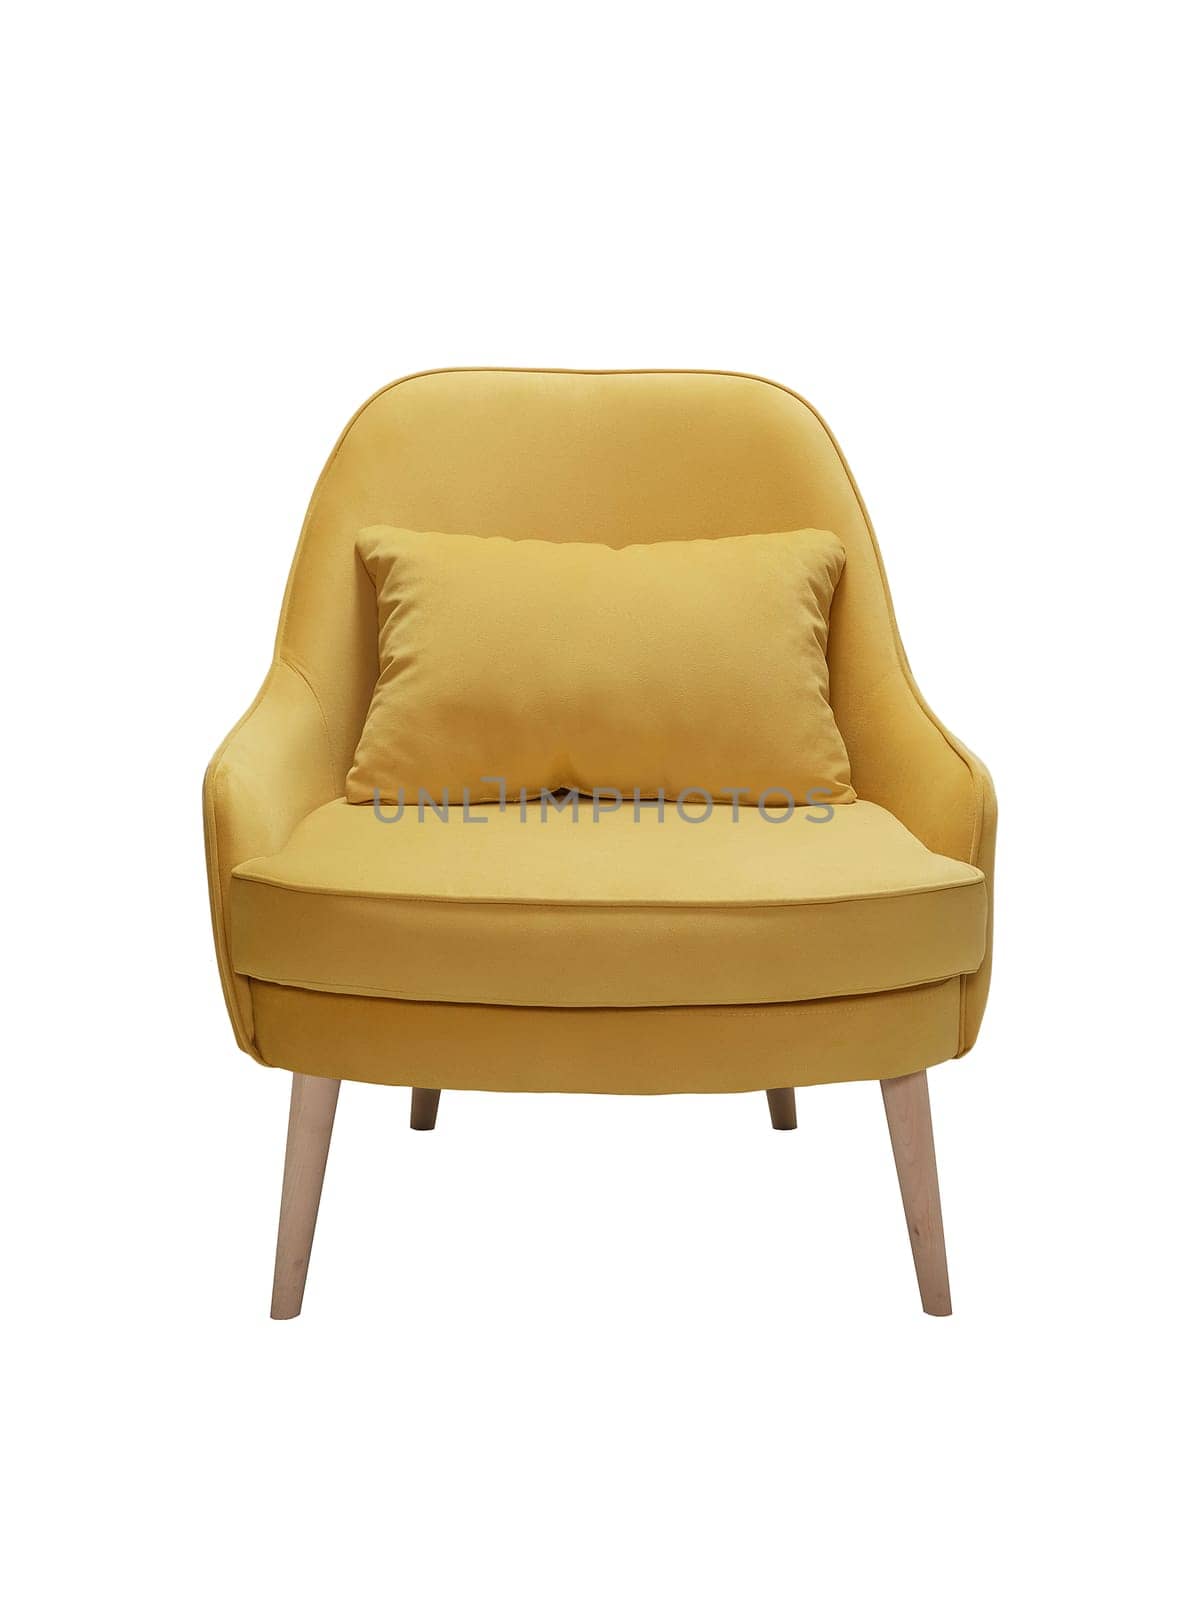 modern yellow fabric armchair with wooden legs isolated on white background, front view by artemzatsepilin